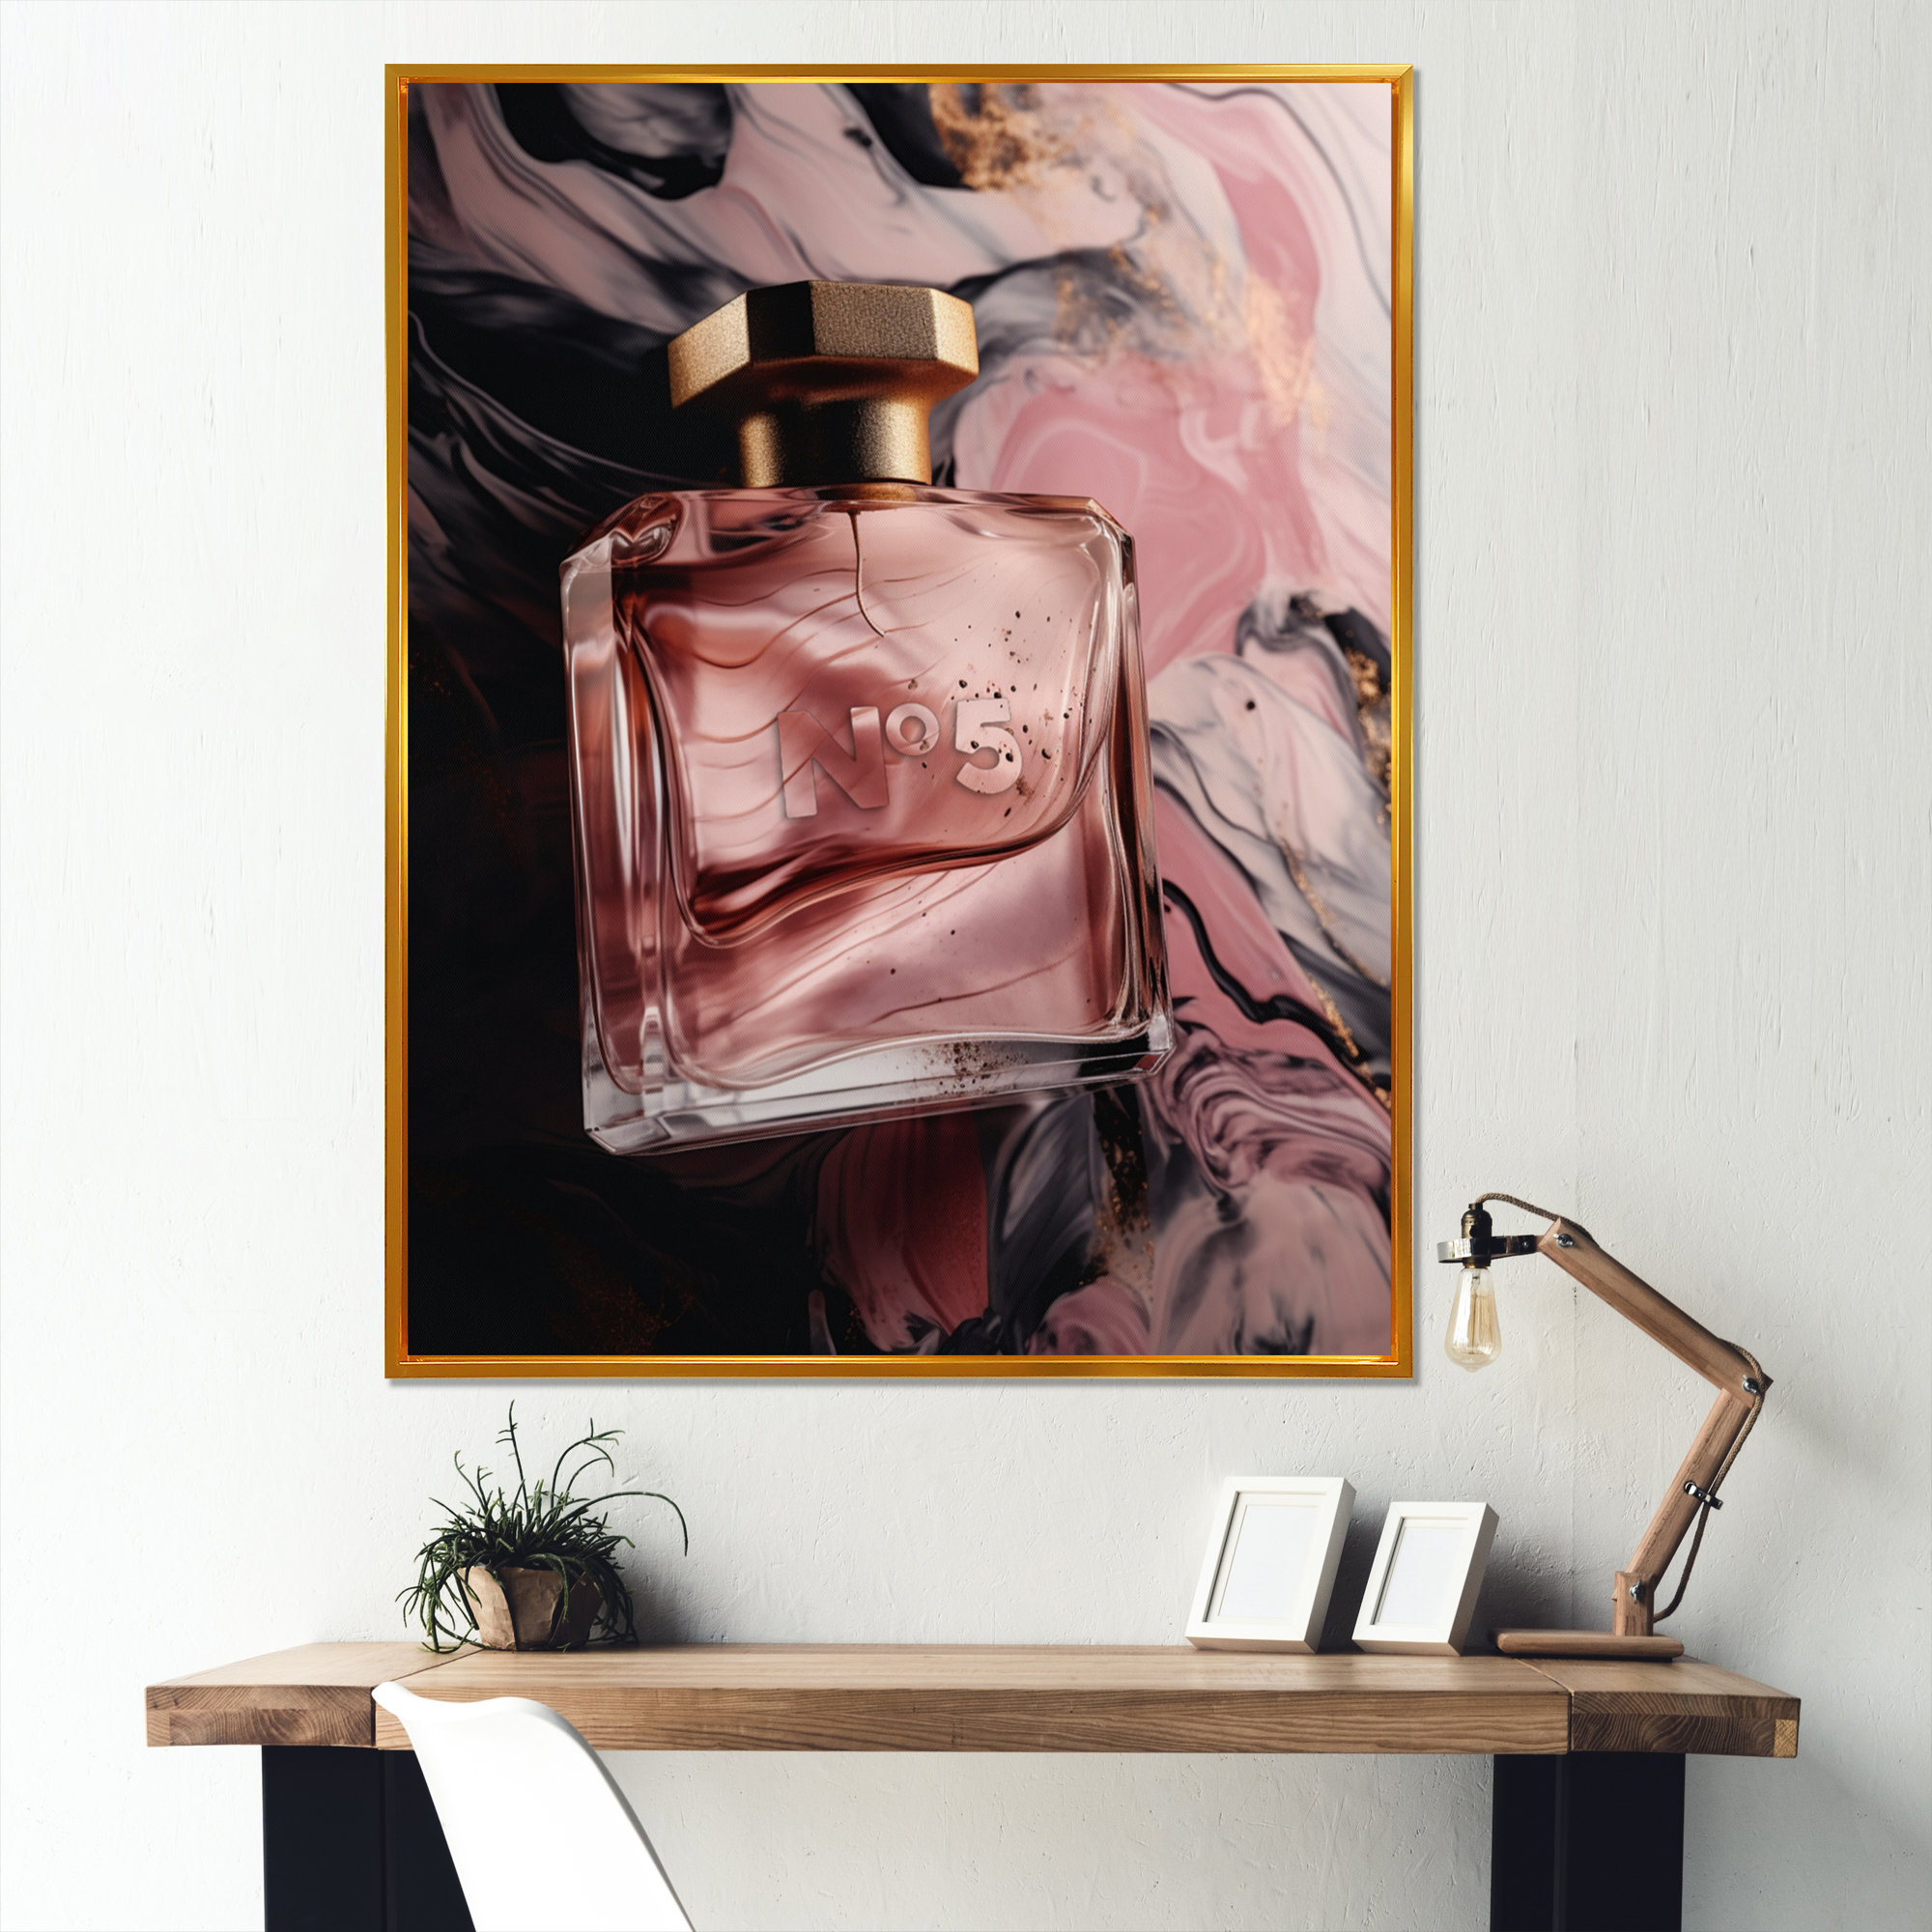 Fashionable Perfume Fragrance V - Print House of Hampton Format: Black Picture Framed, Size: 20 H x 12 W x 1 D